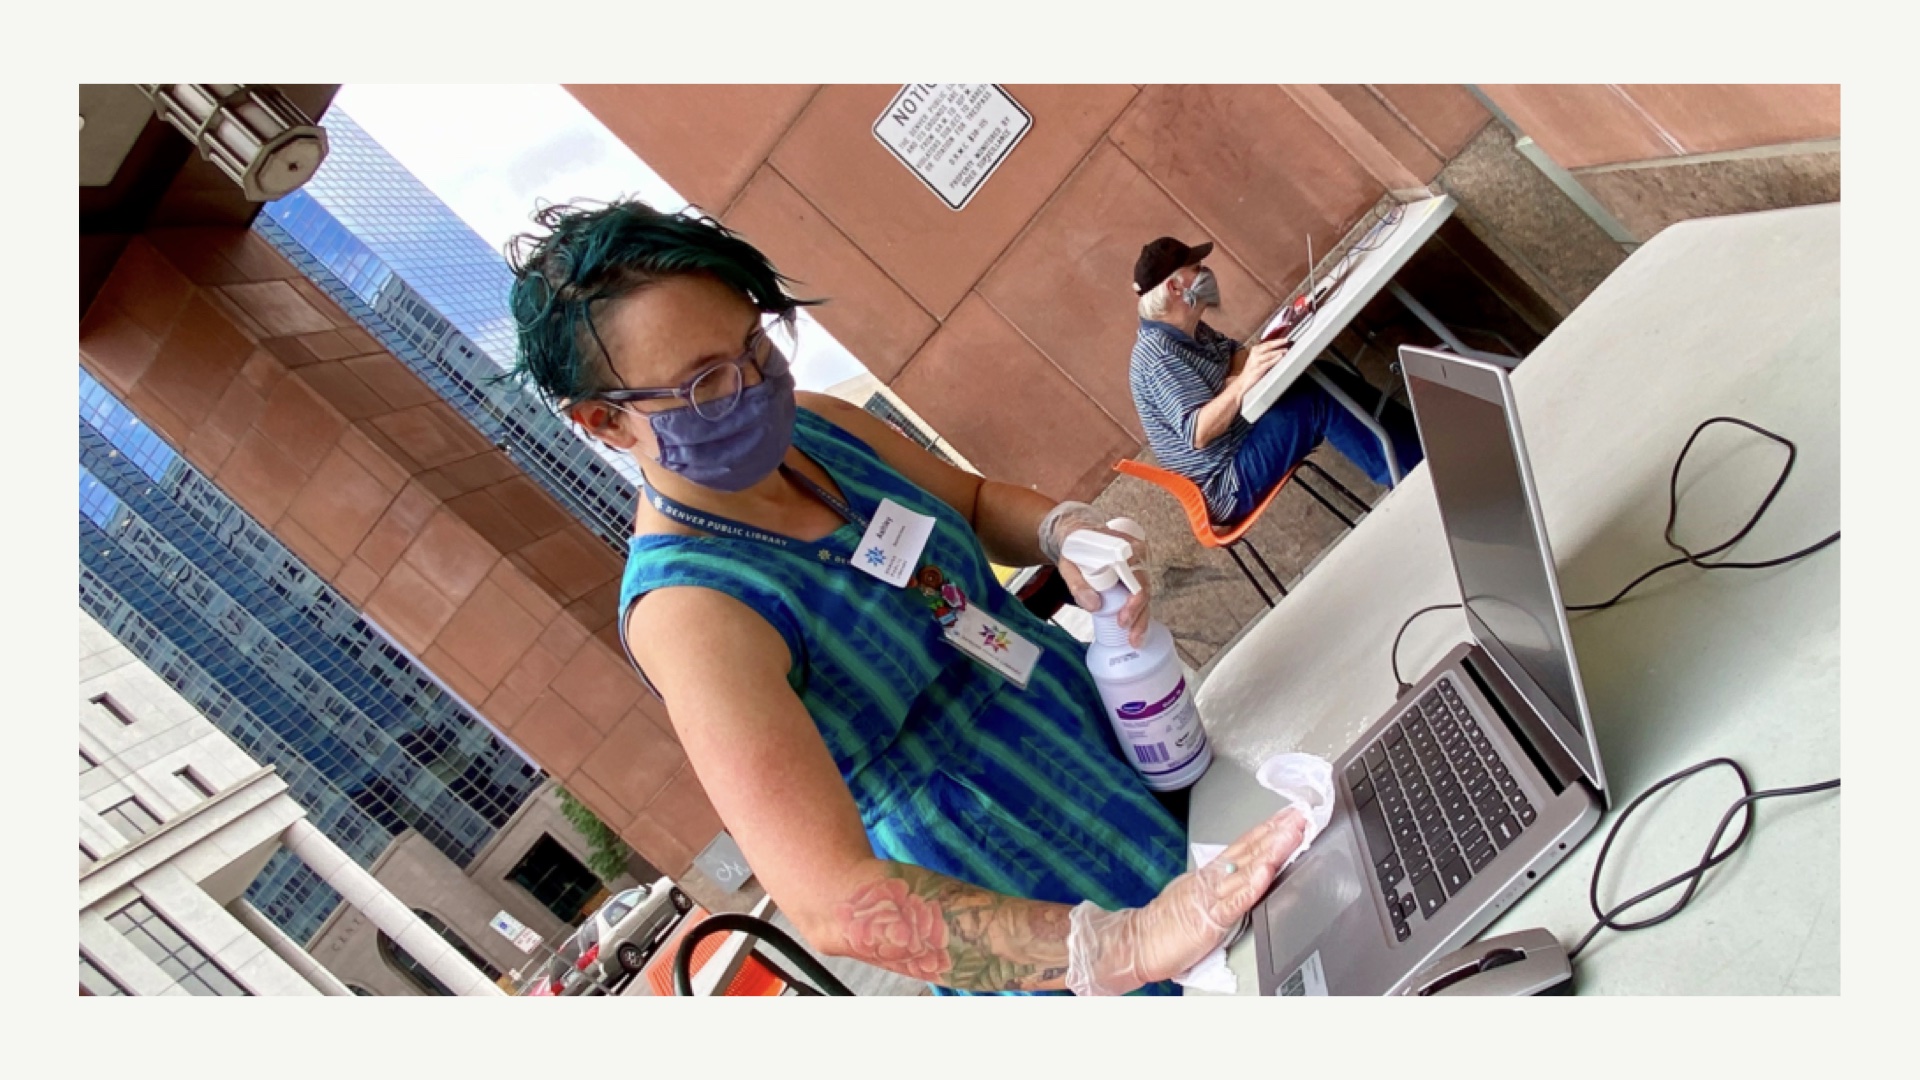 [photograph of Denver public librarian masked and gloved wiping down a public laptop in an outdoor atrium area]